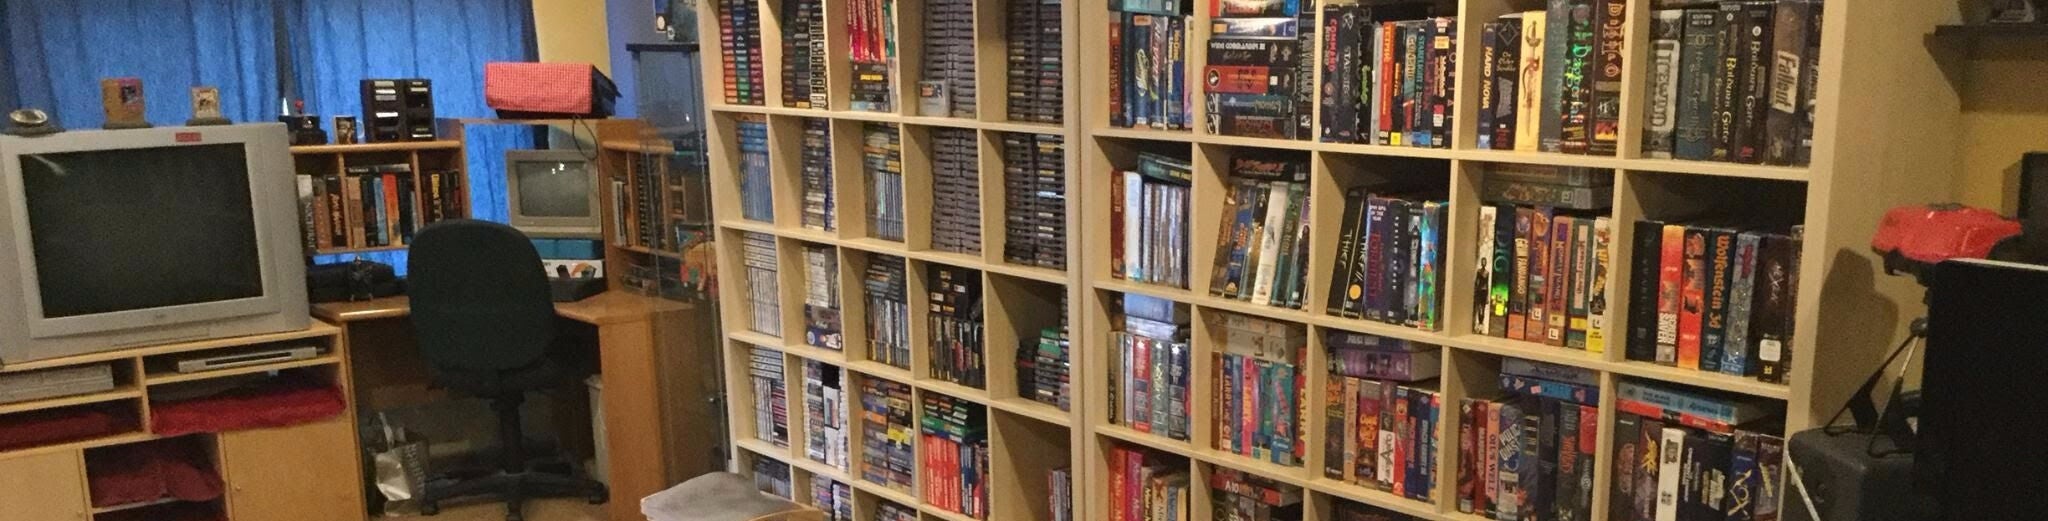 Image for Near mint: A conversation with game collectors